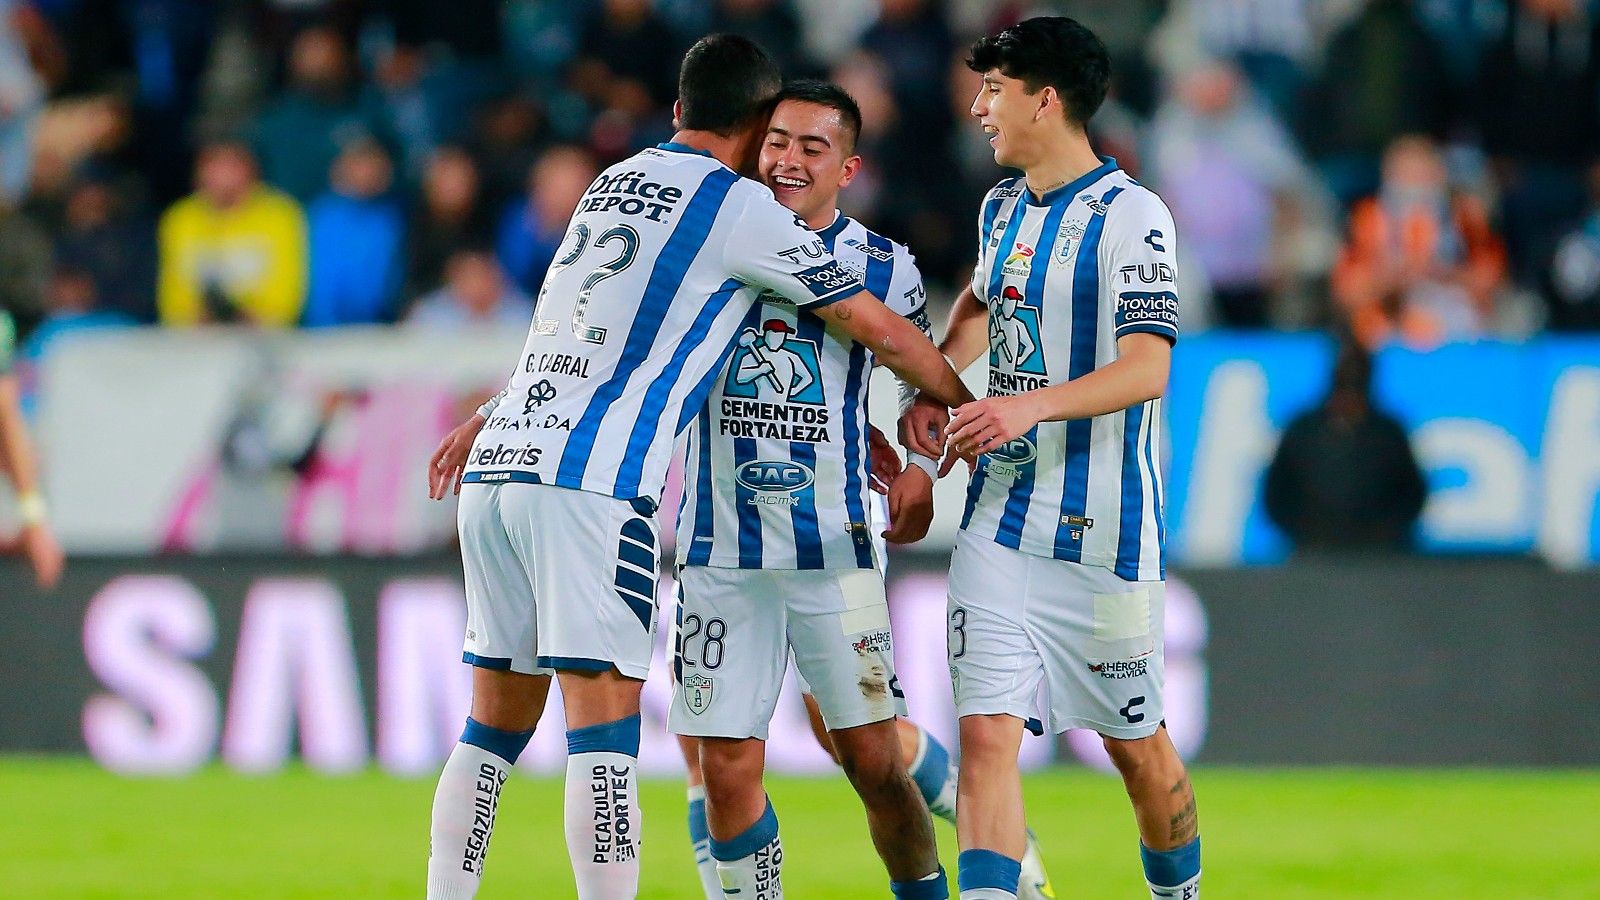 CF Pachuca coming to Q2 Stadium for friendly match against Austin FC